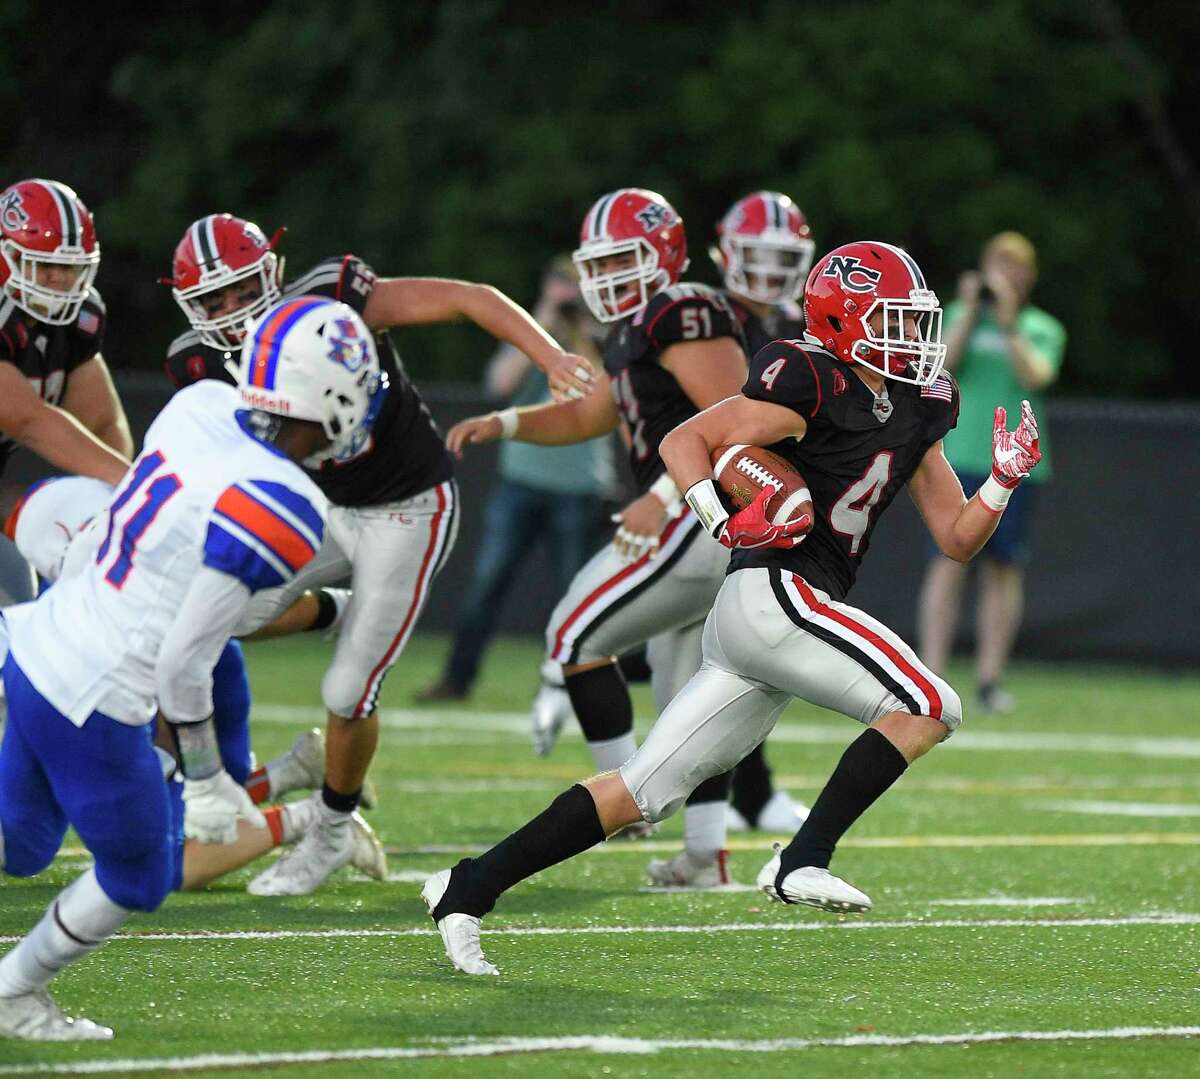 New Canaan’s Drew Guida (4) breaks away from the pack as the Rams defeated Danbury 42-6 in a FCIAC football game at Dunning Field on Friday, Sept. 14, 2018.